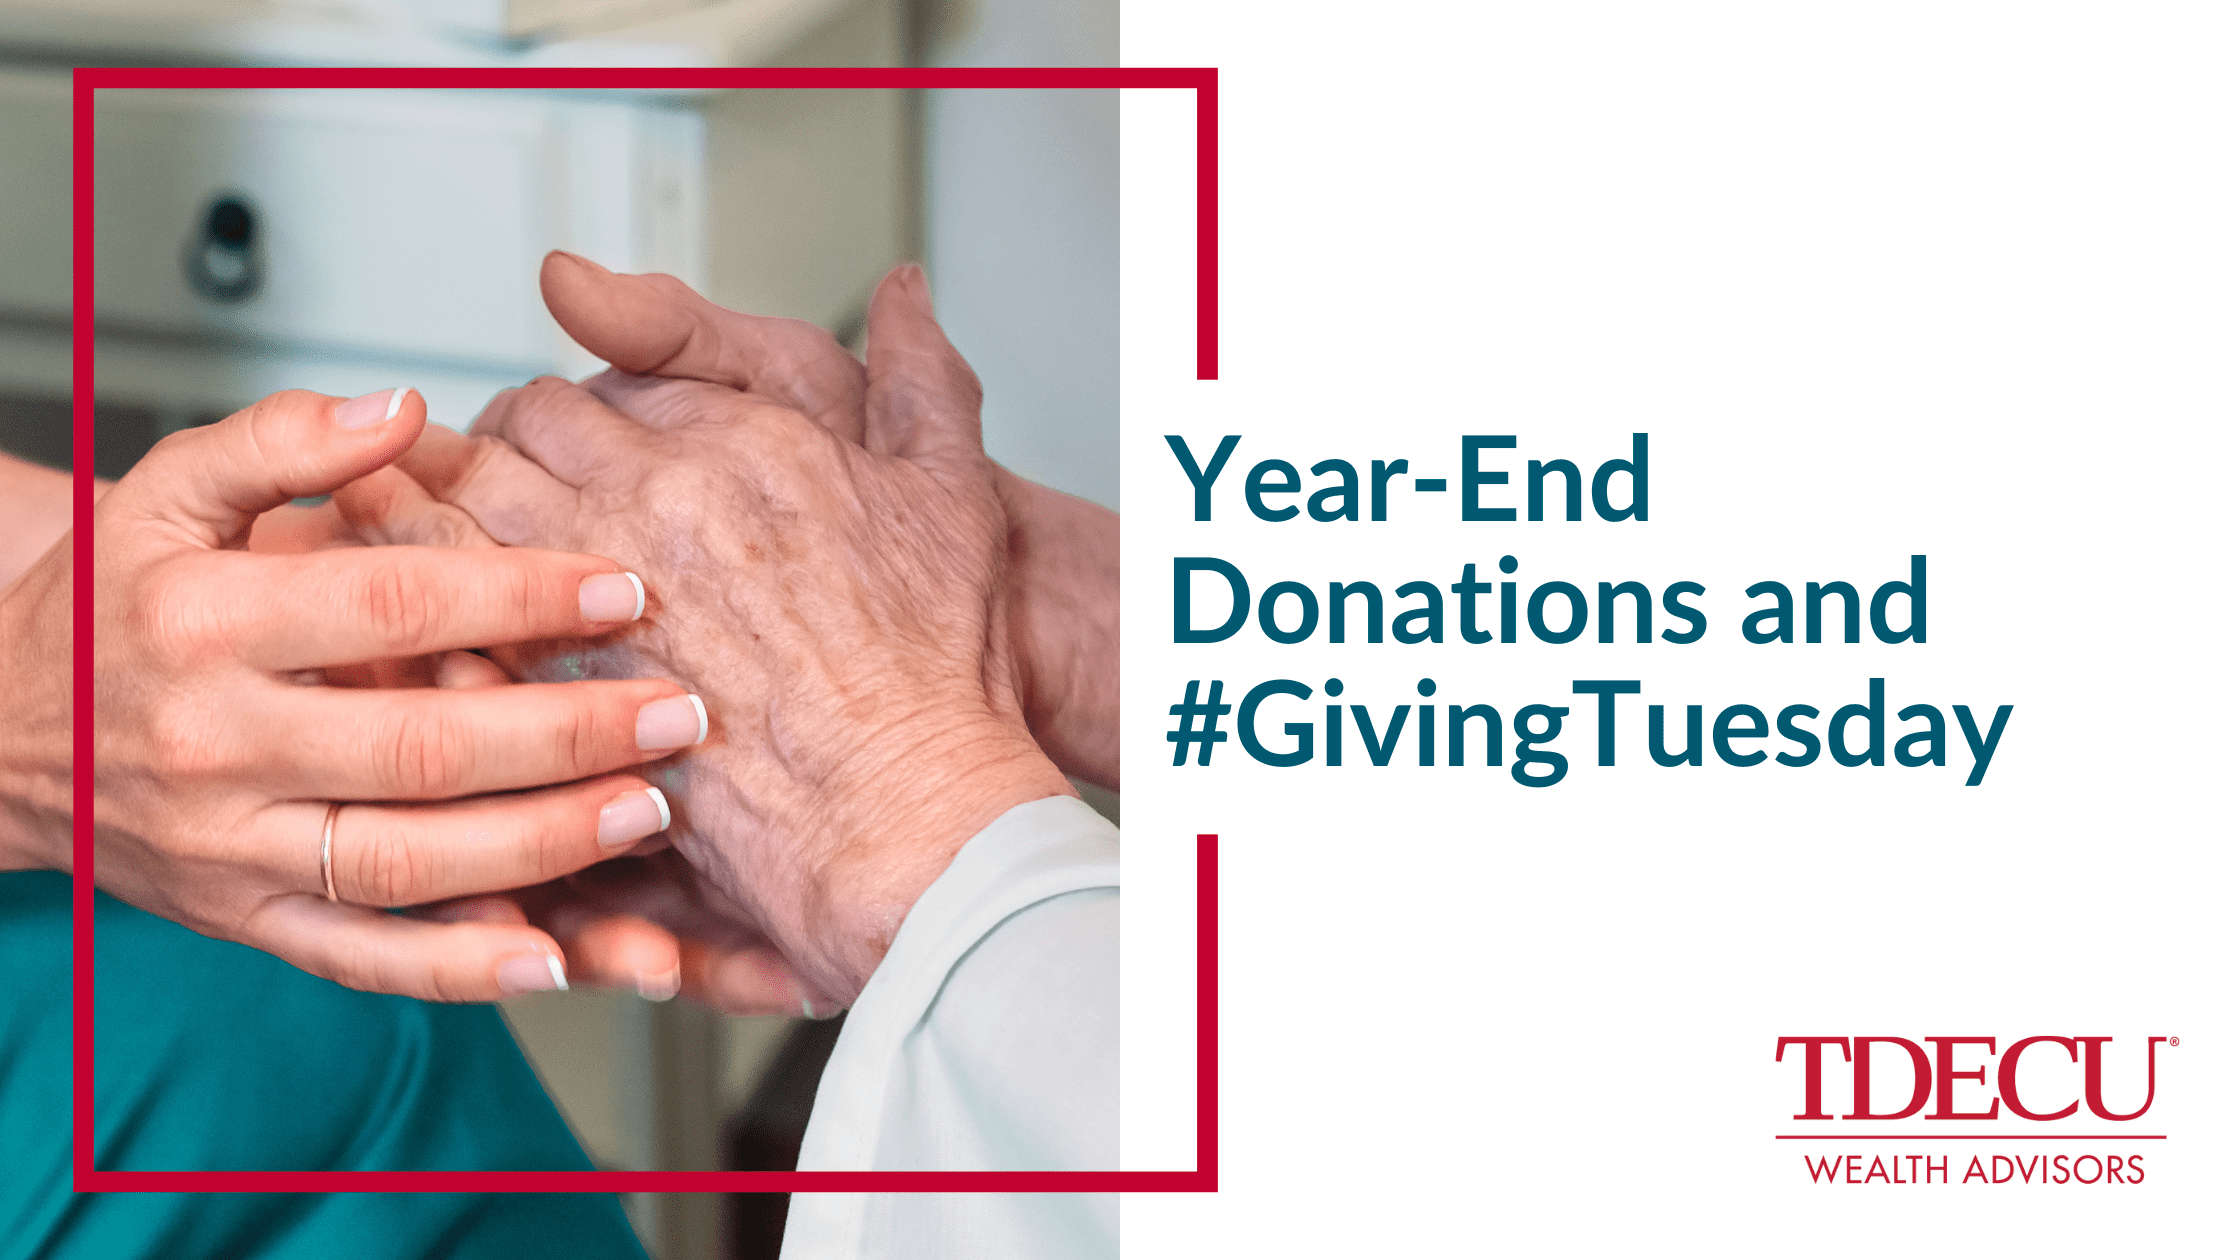 Year-End Donations and #GivingTuesday